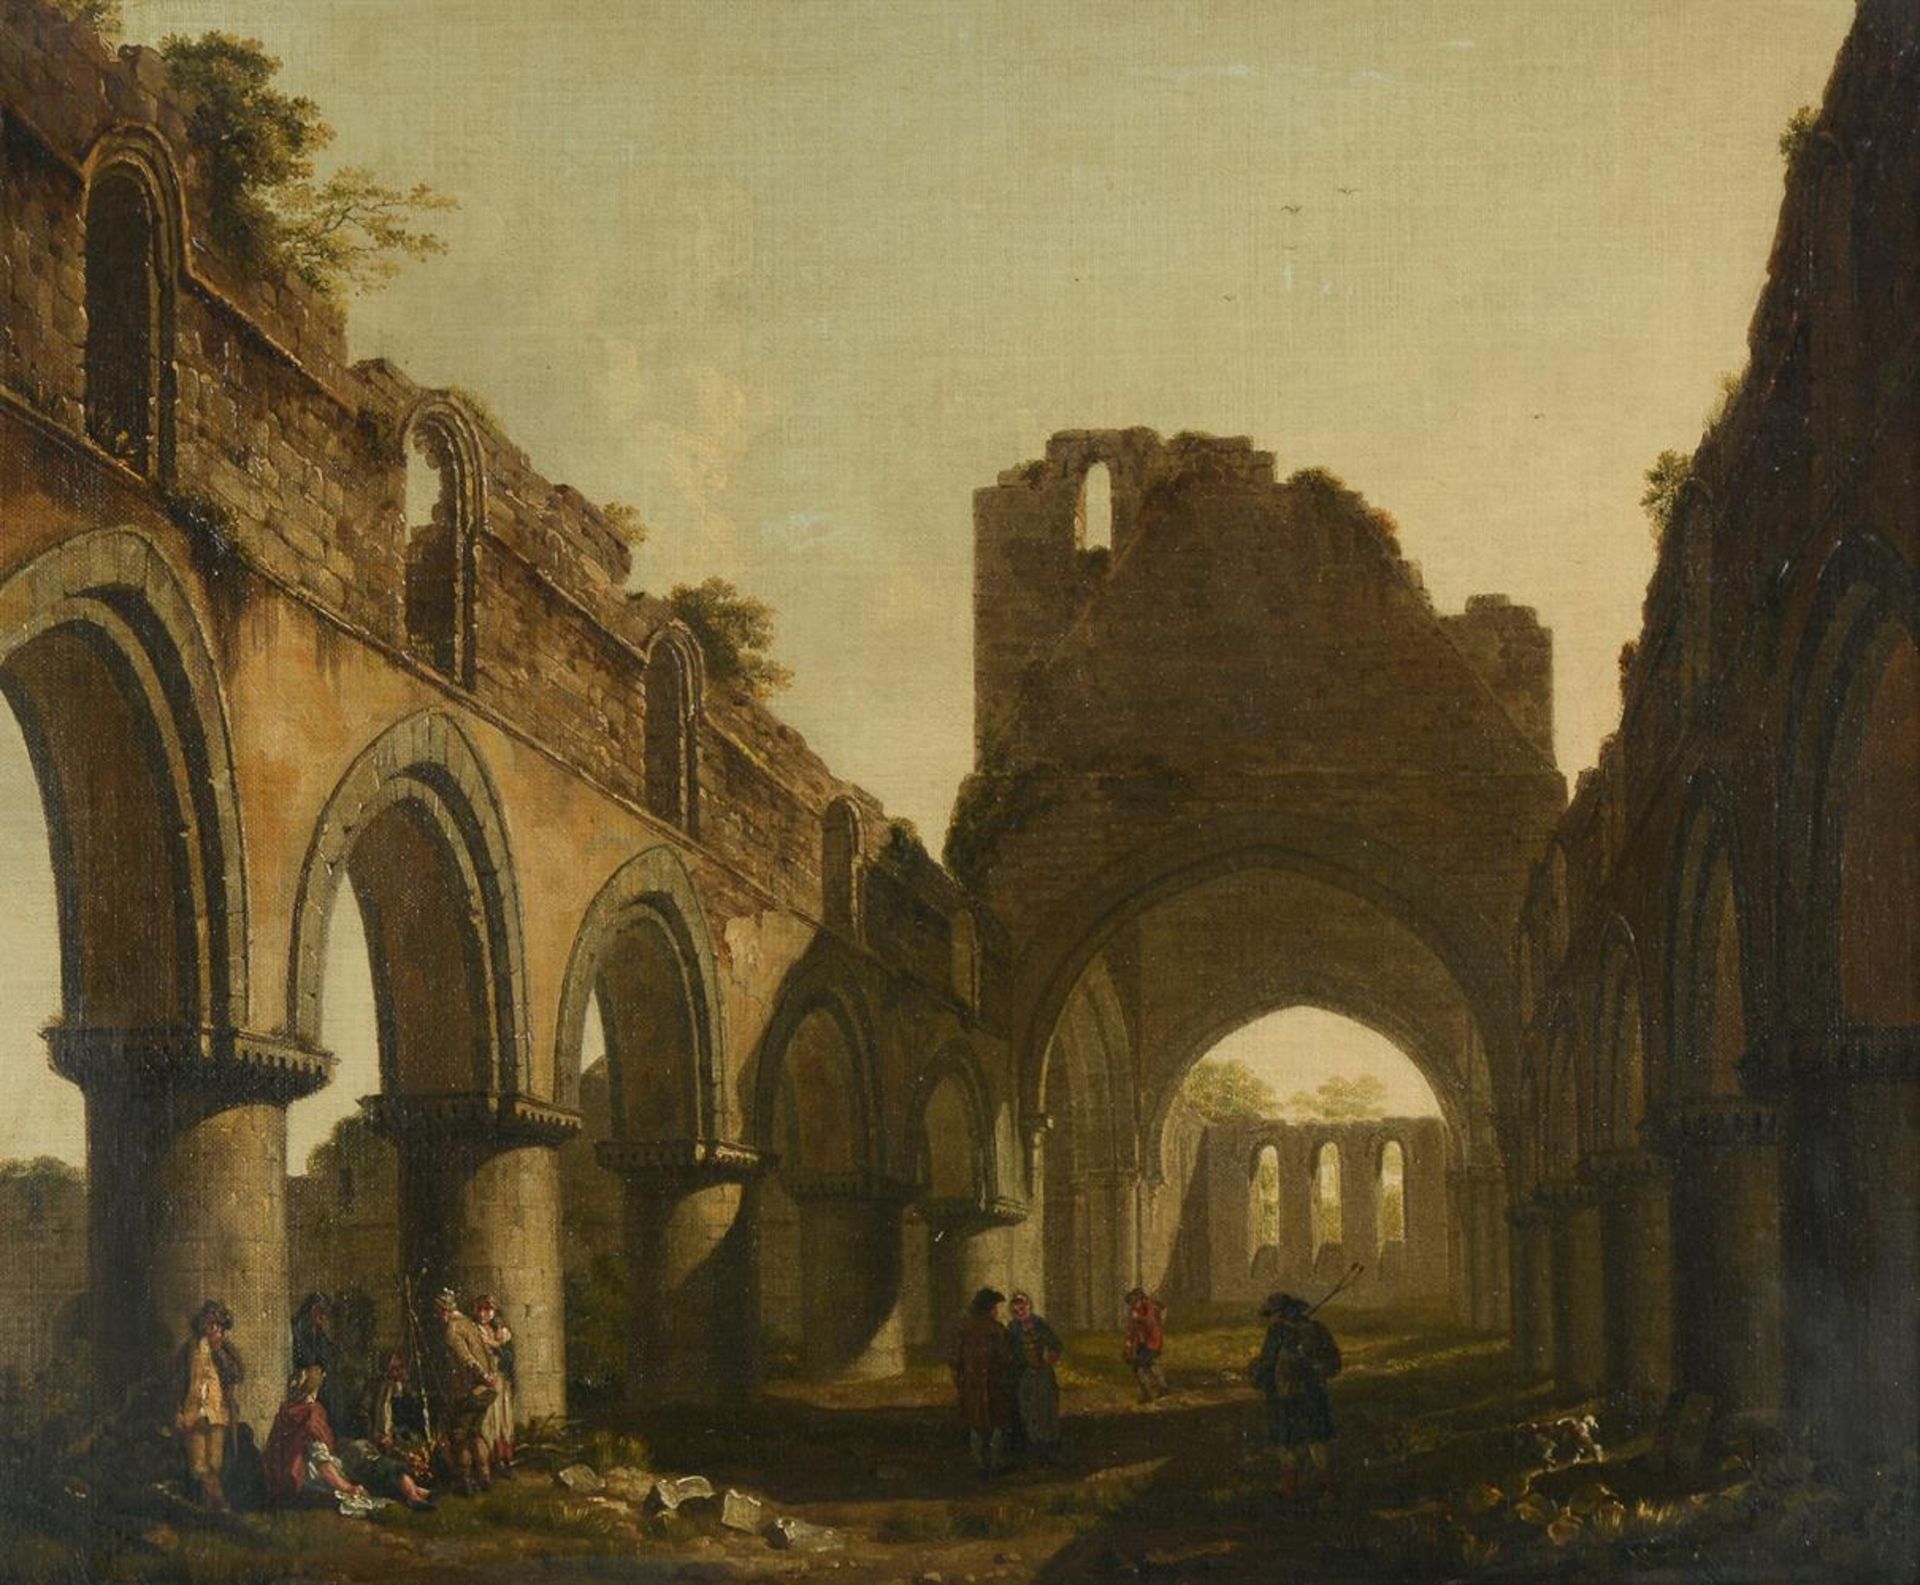 MICHAEL ANGELO ROOKER (BRITISH 1743-1801), BUILDWAS ABBEY